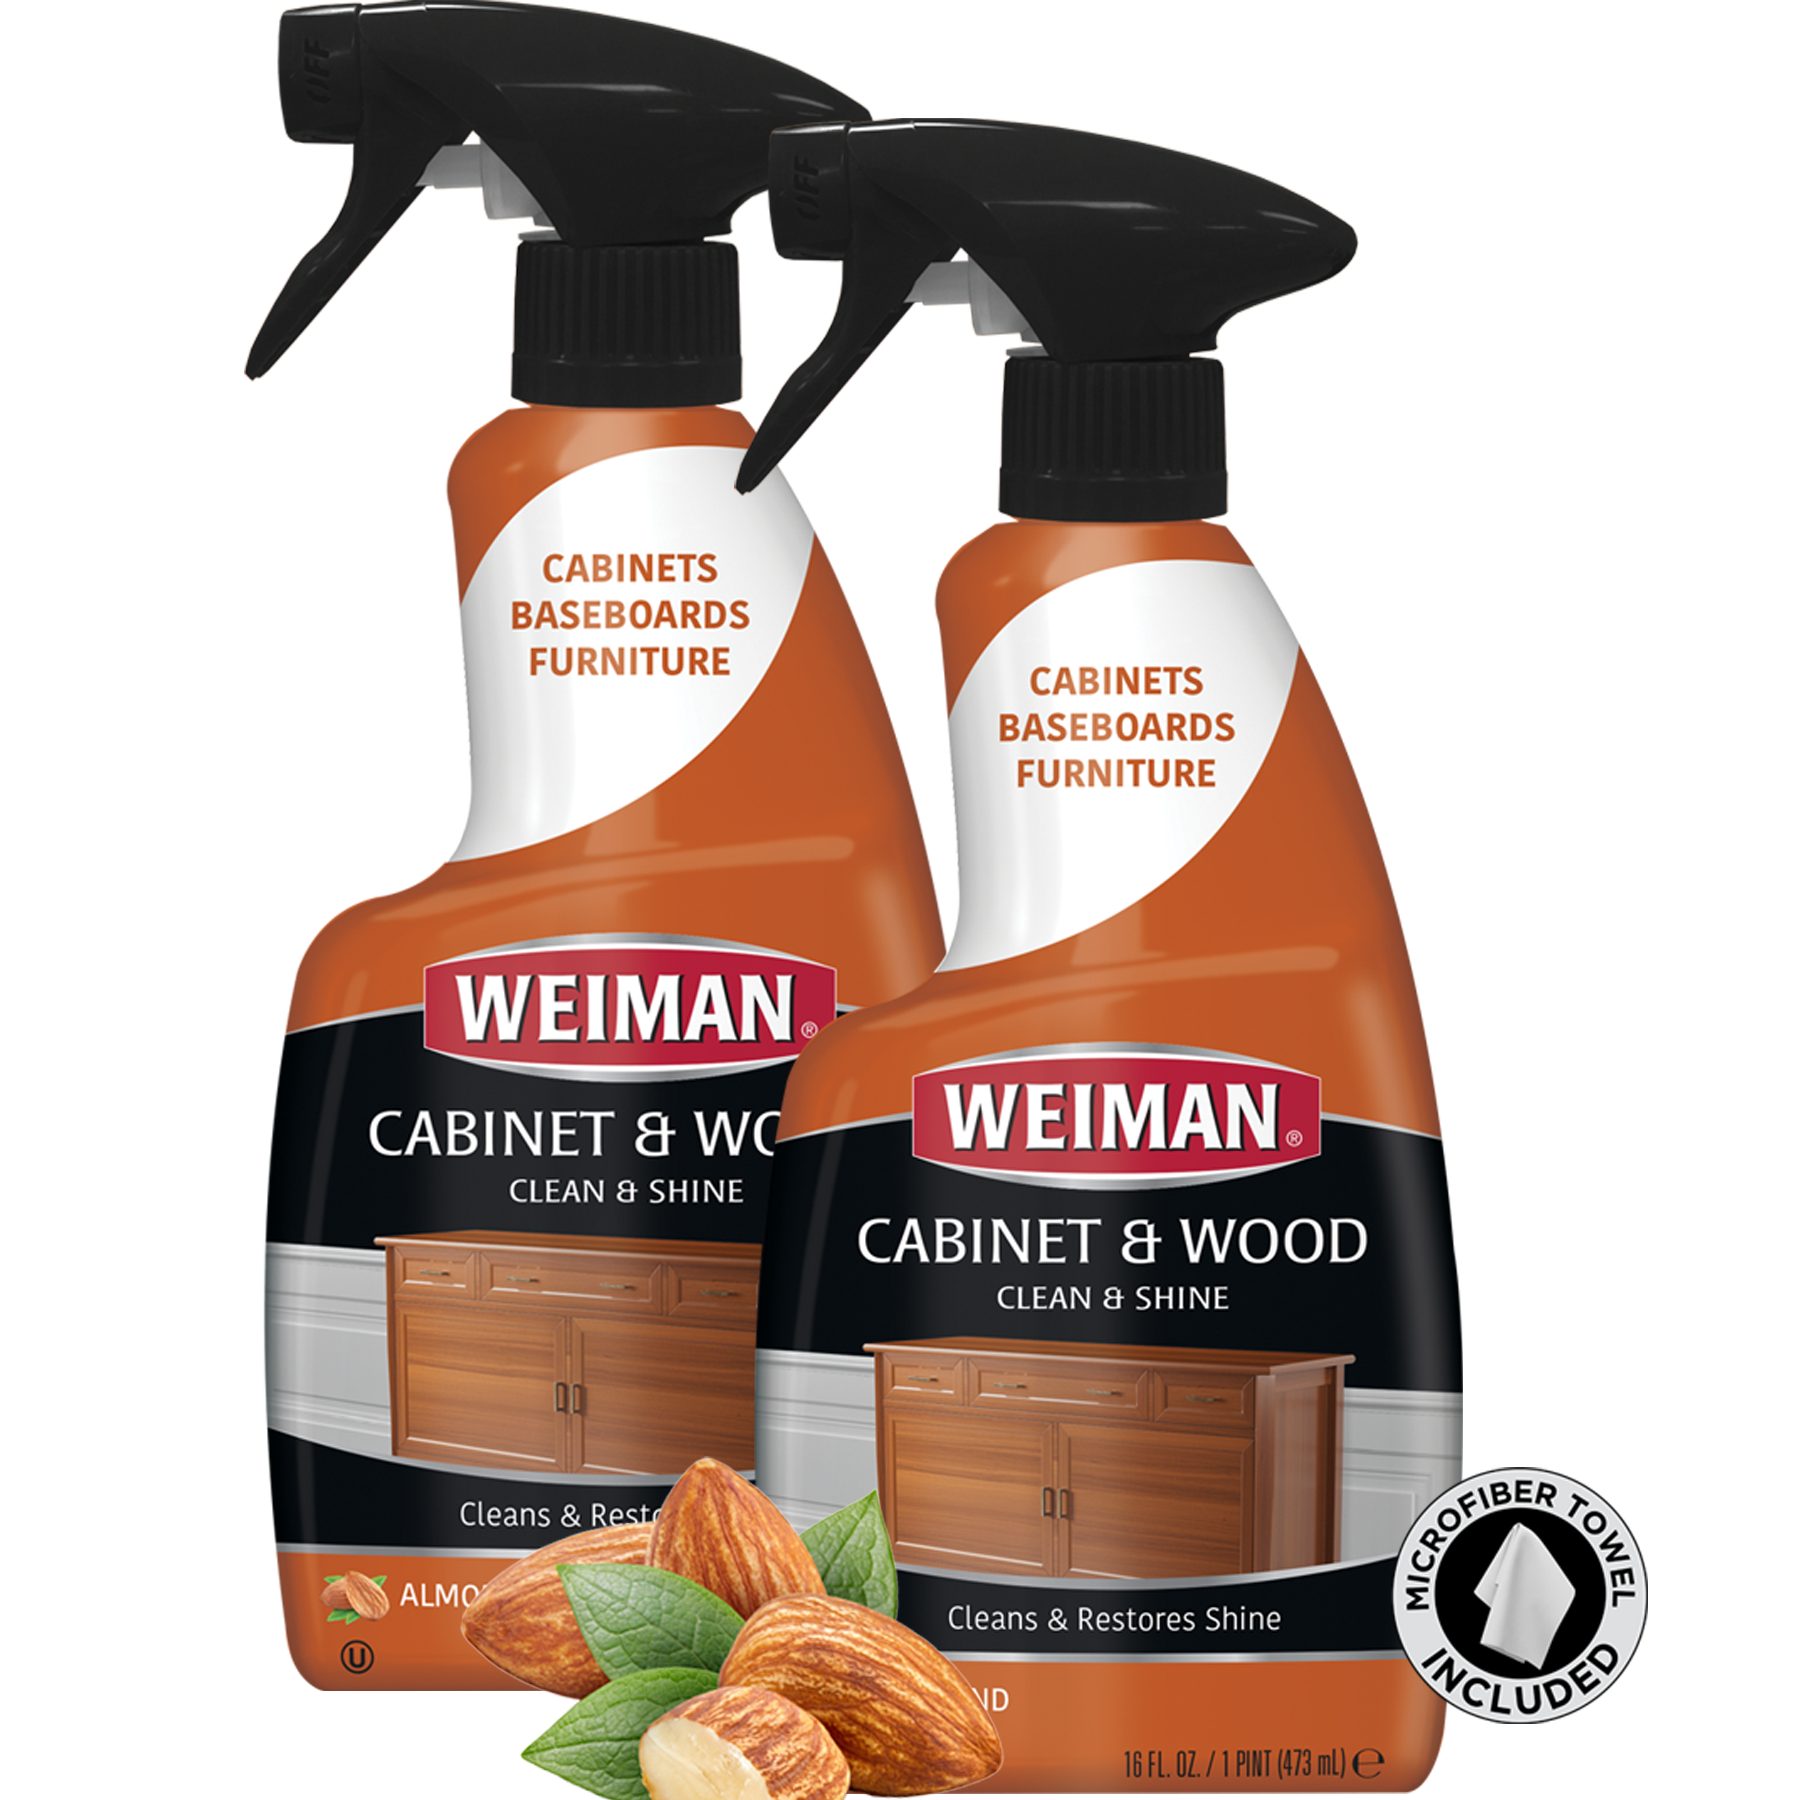 Weiman Liquid Wood Cleaner & Polish, Almond Scent, 16 Fluid Ounce, 2 Count w/ Microfiber Towel - image 1 of 8